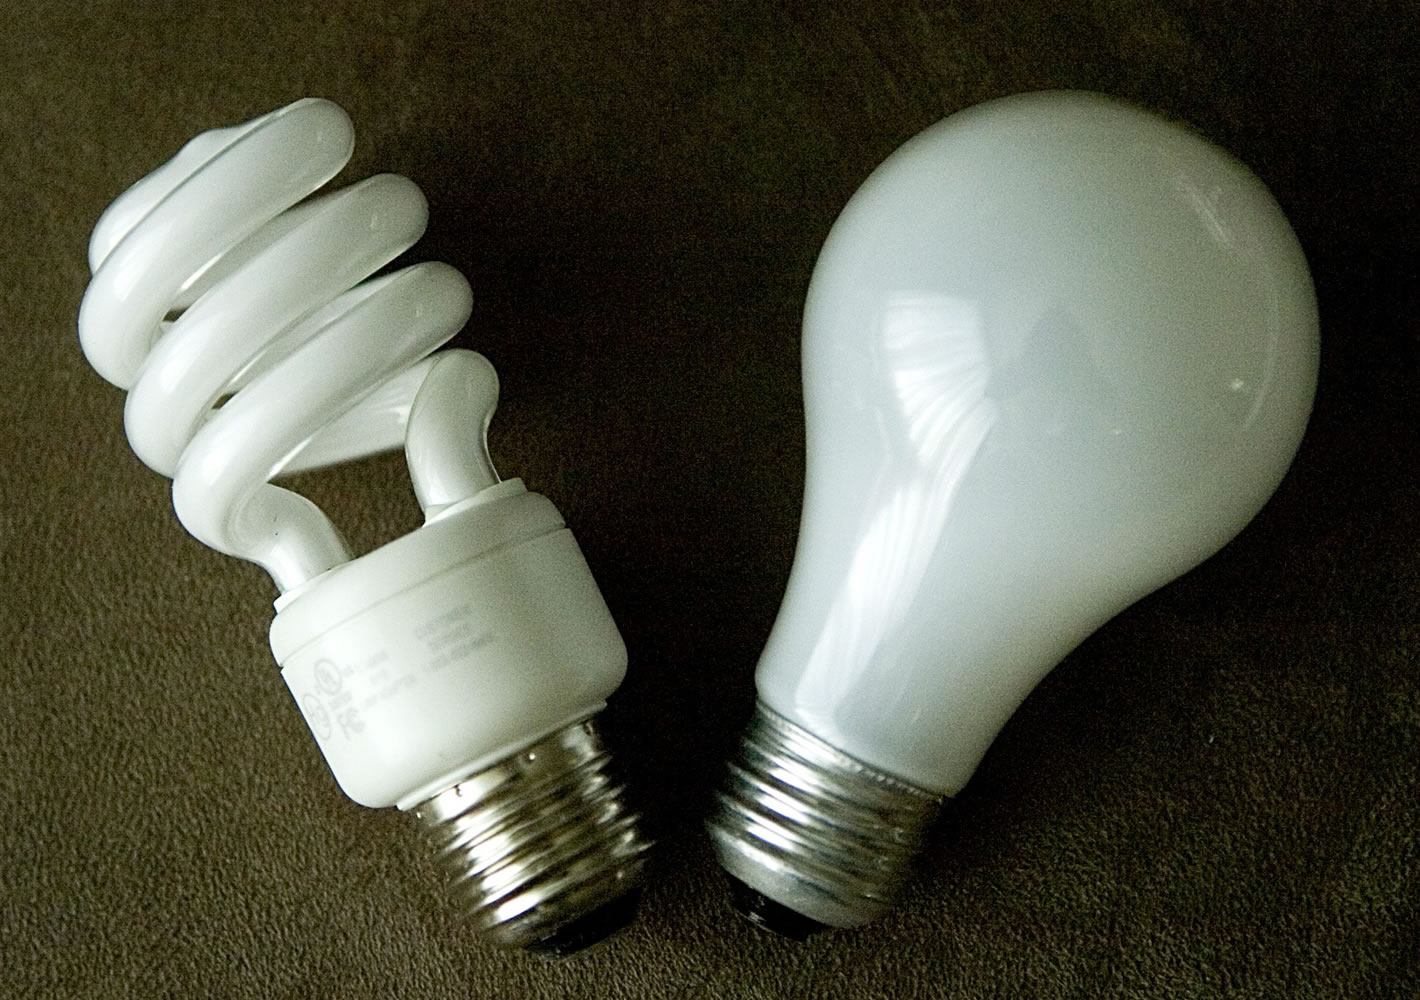 A traditional incandescent bulb, right, and a more energy-efficient compact fluorescent.